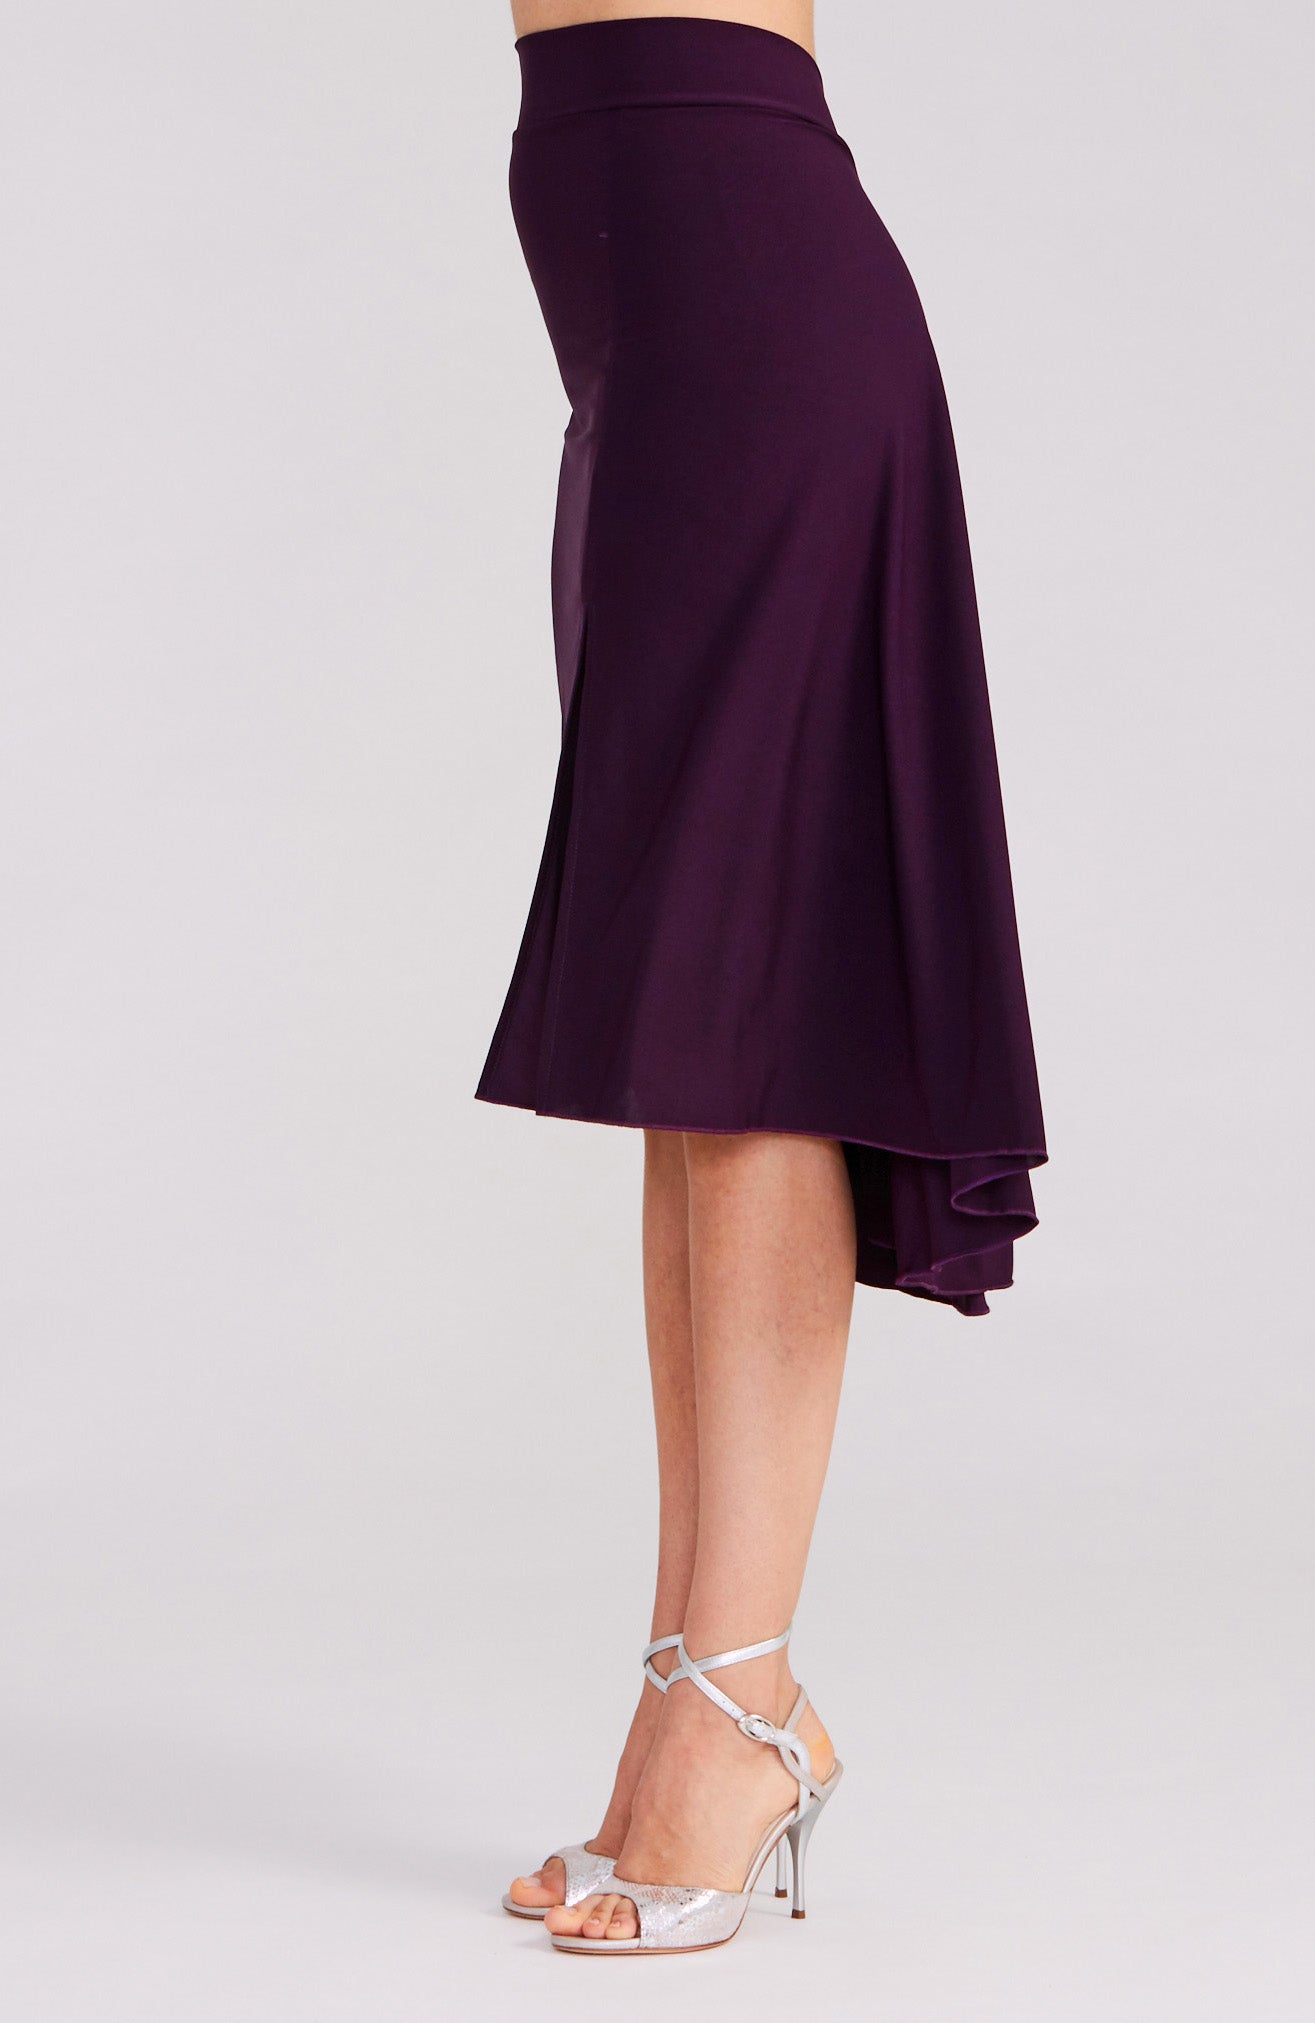 tango skirt in violet with slit